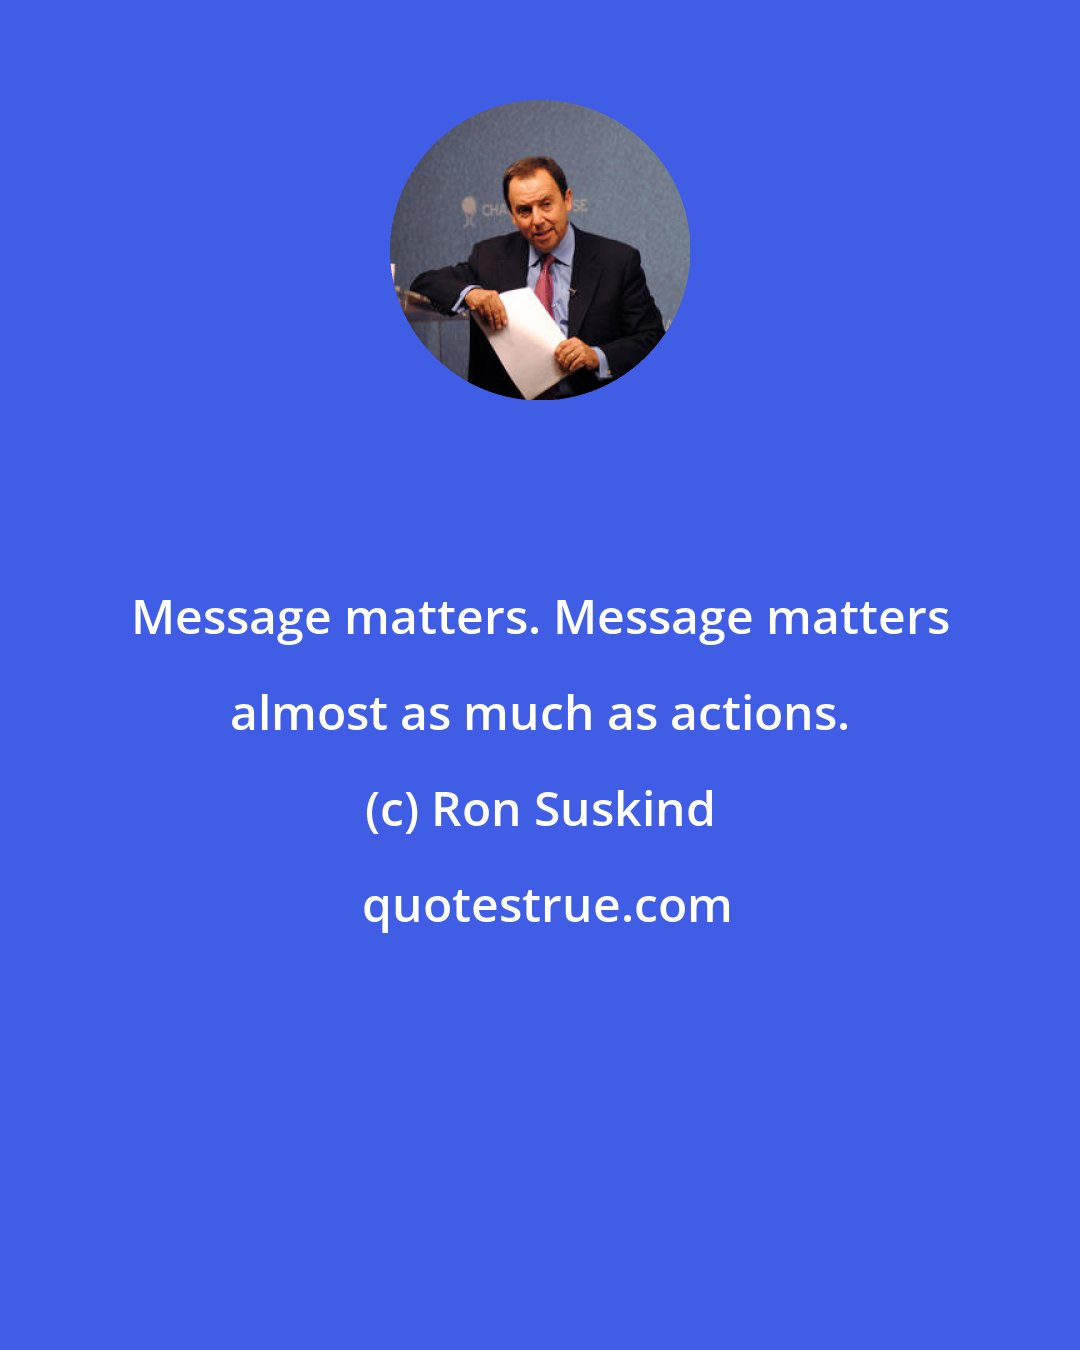 Ron Suskind: Message matters. Message matters almost as much as actions.